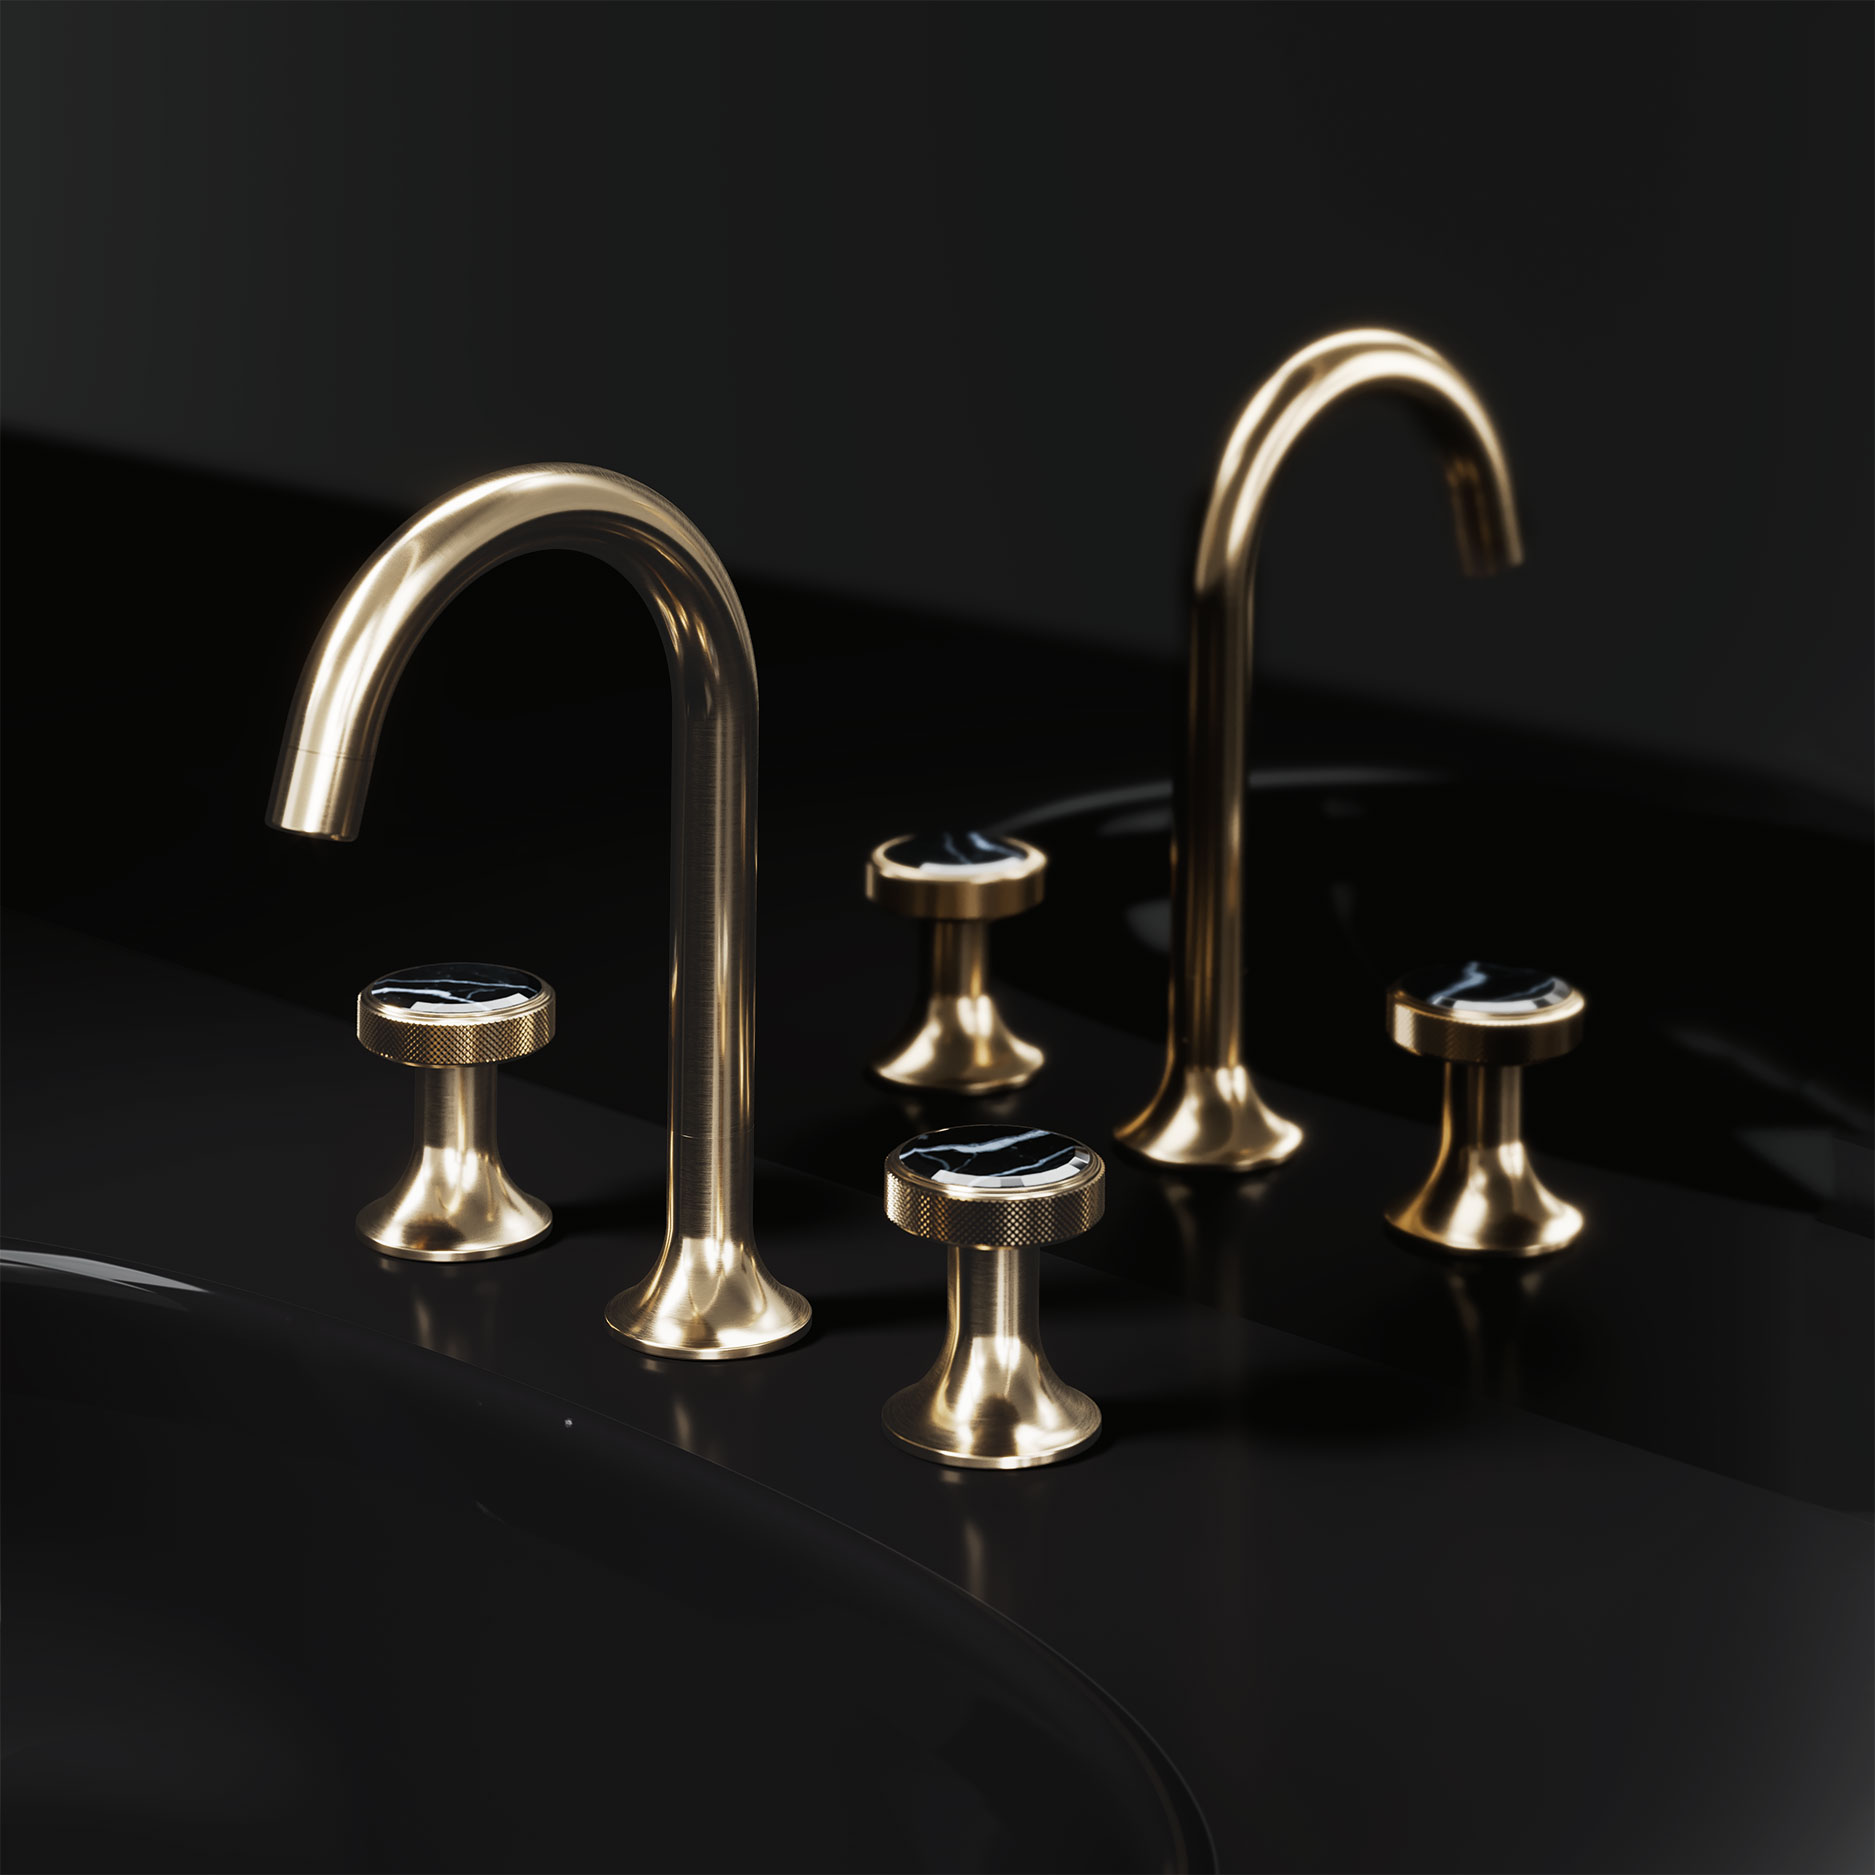 glamorous – Exquisite shine Fittings Luxury Avant-garde with Bathroom Jörger - moments Accessories and &